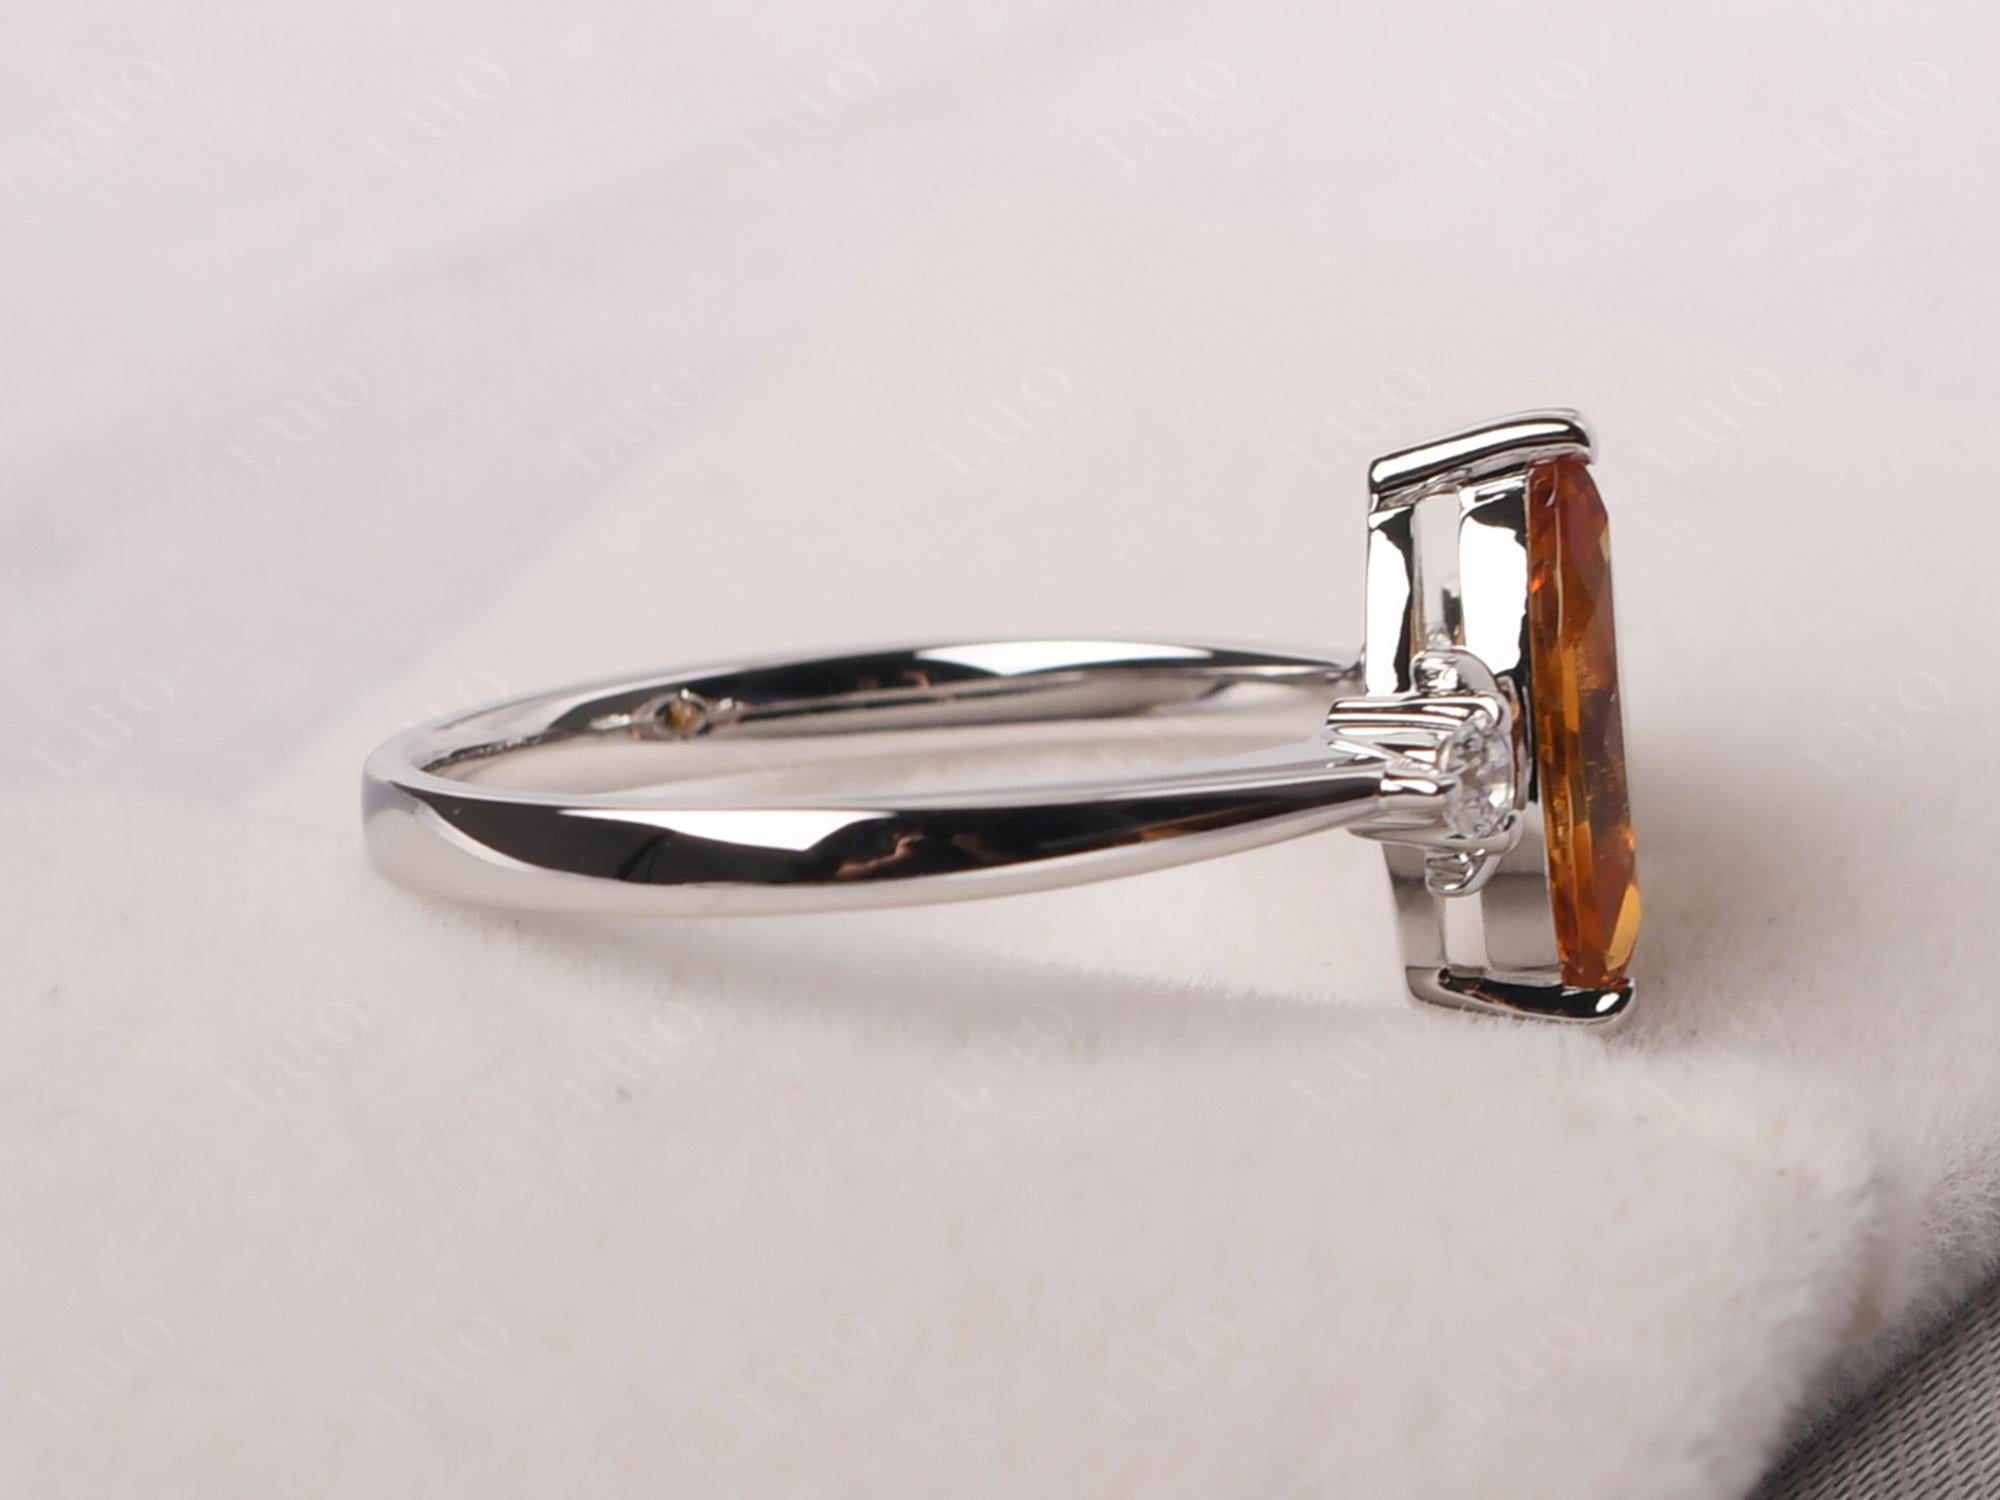 Moon Inspired Citrine Engagement Ring - LUO Jewelry